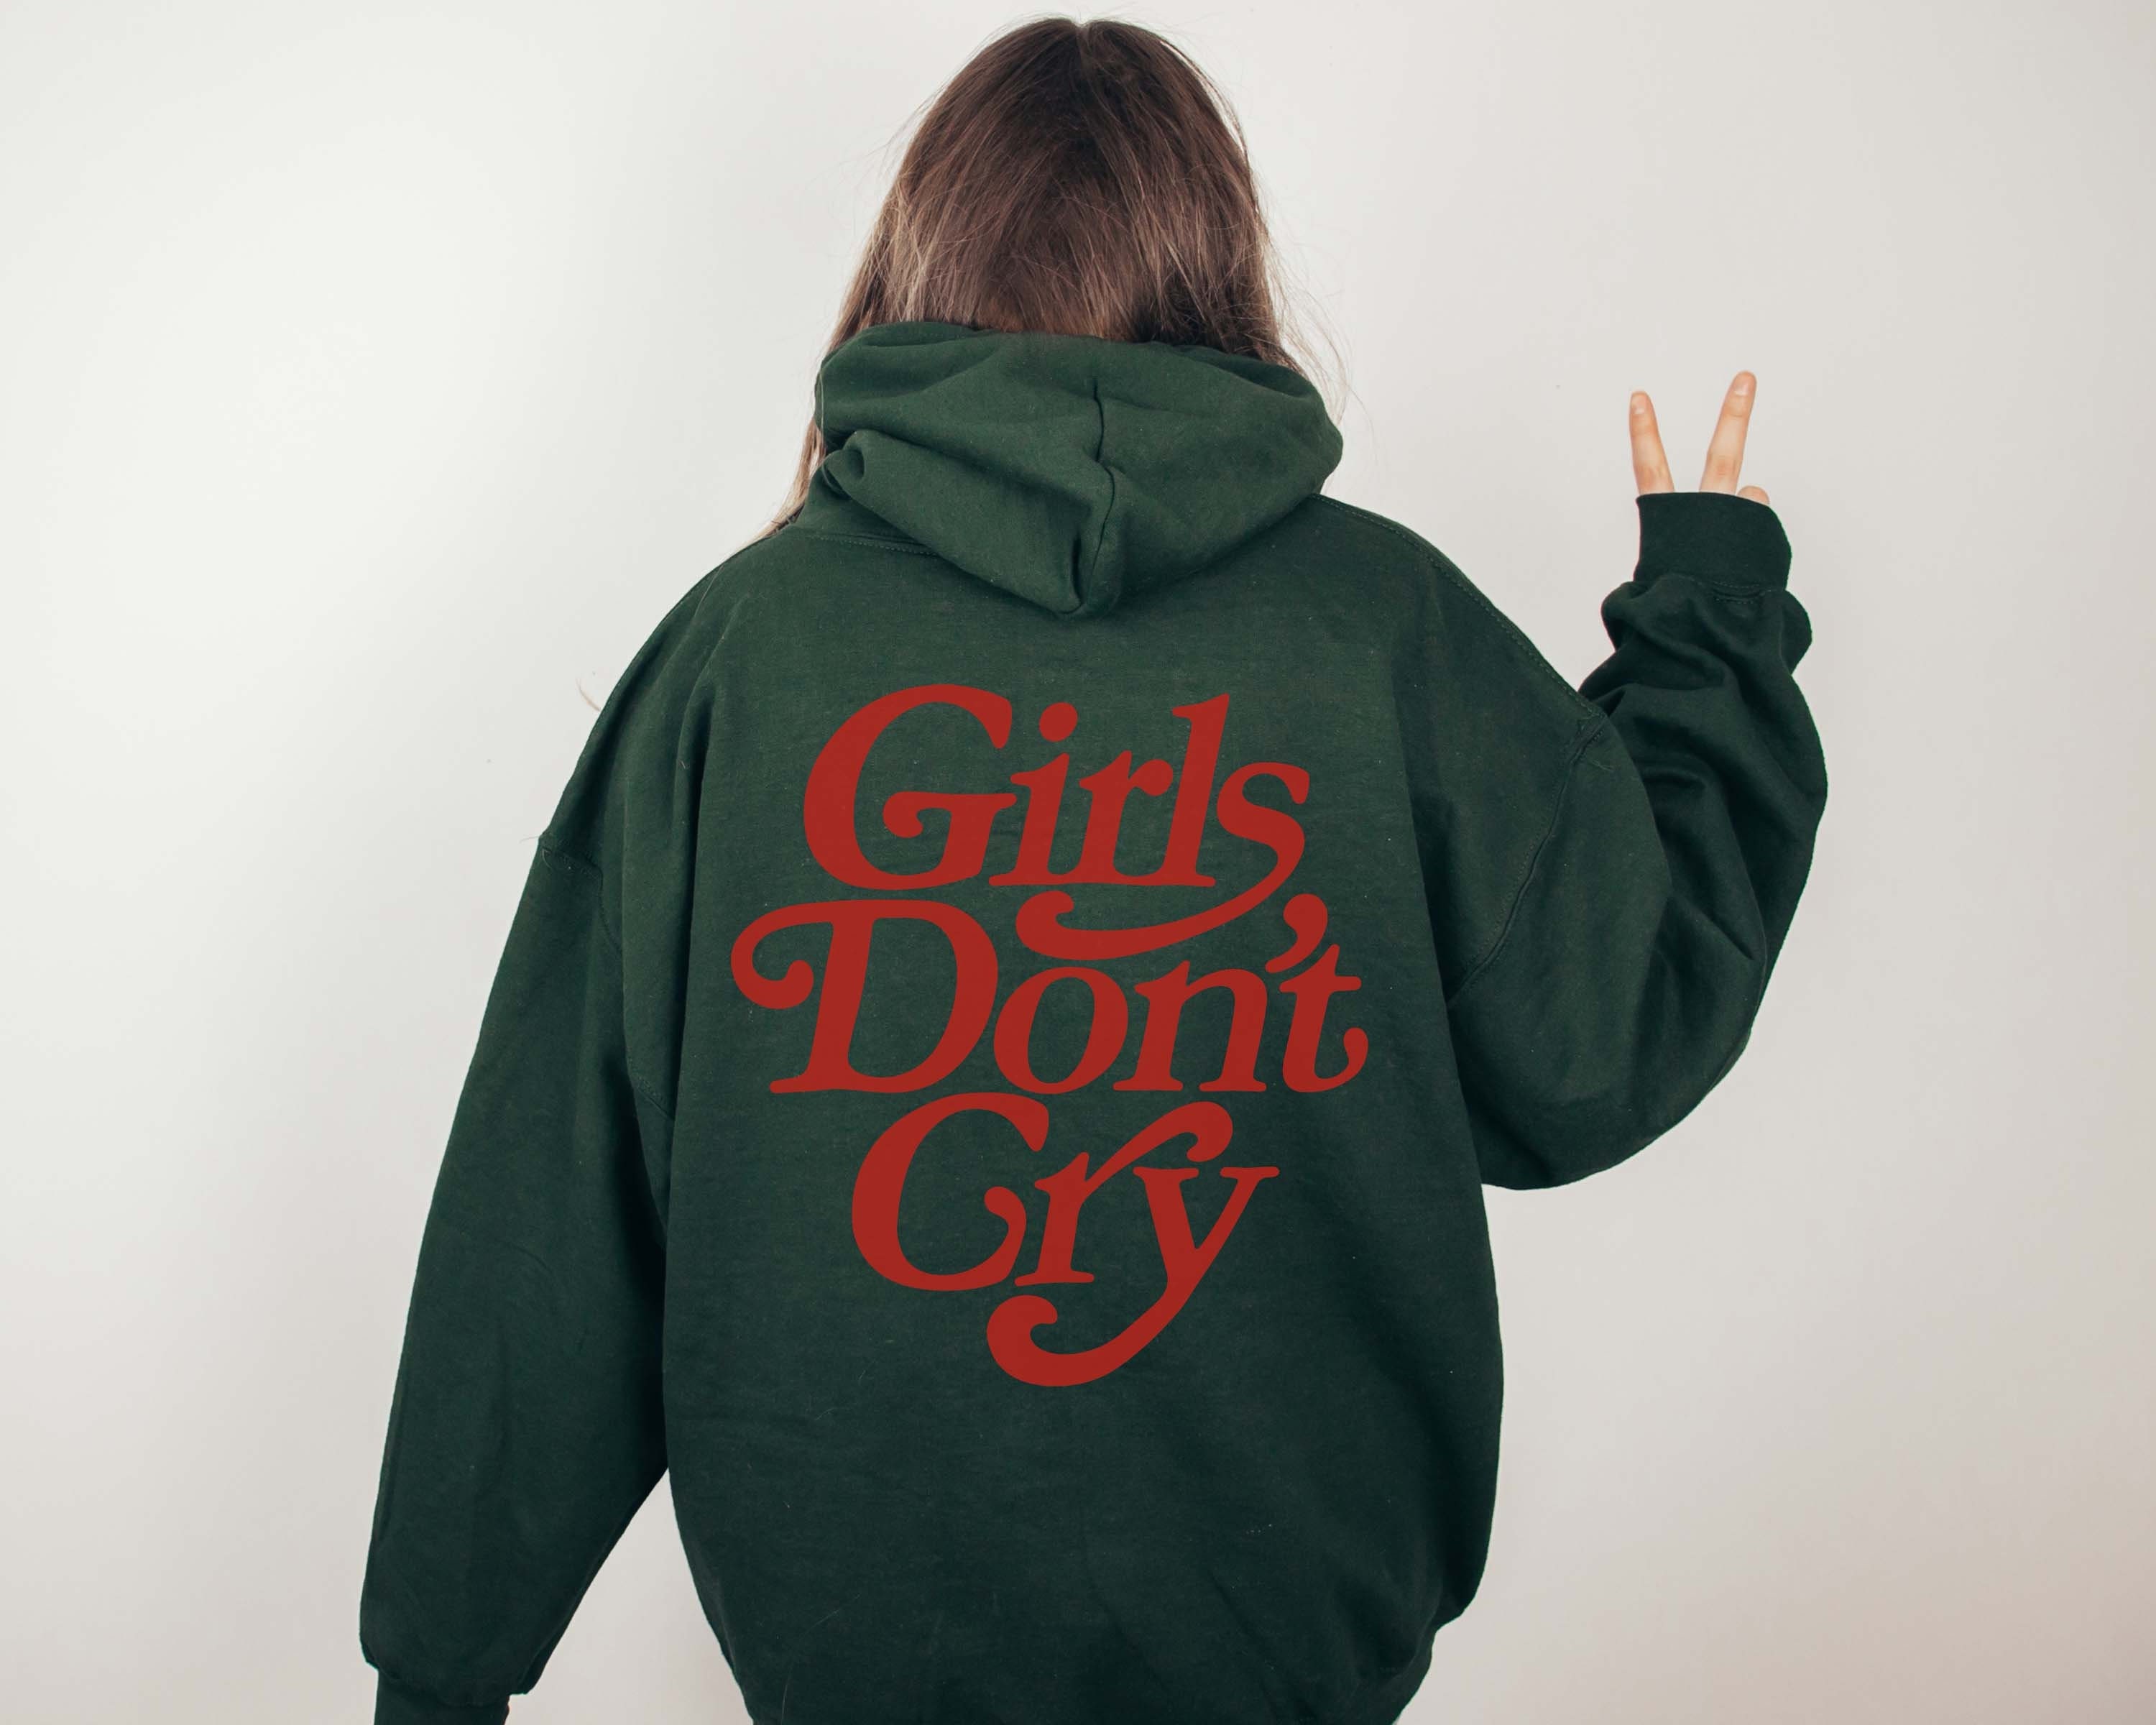 girls dont cry logo hoodie m パーカー トップス メンズ 【超特価】